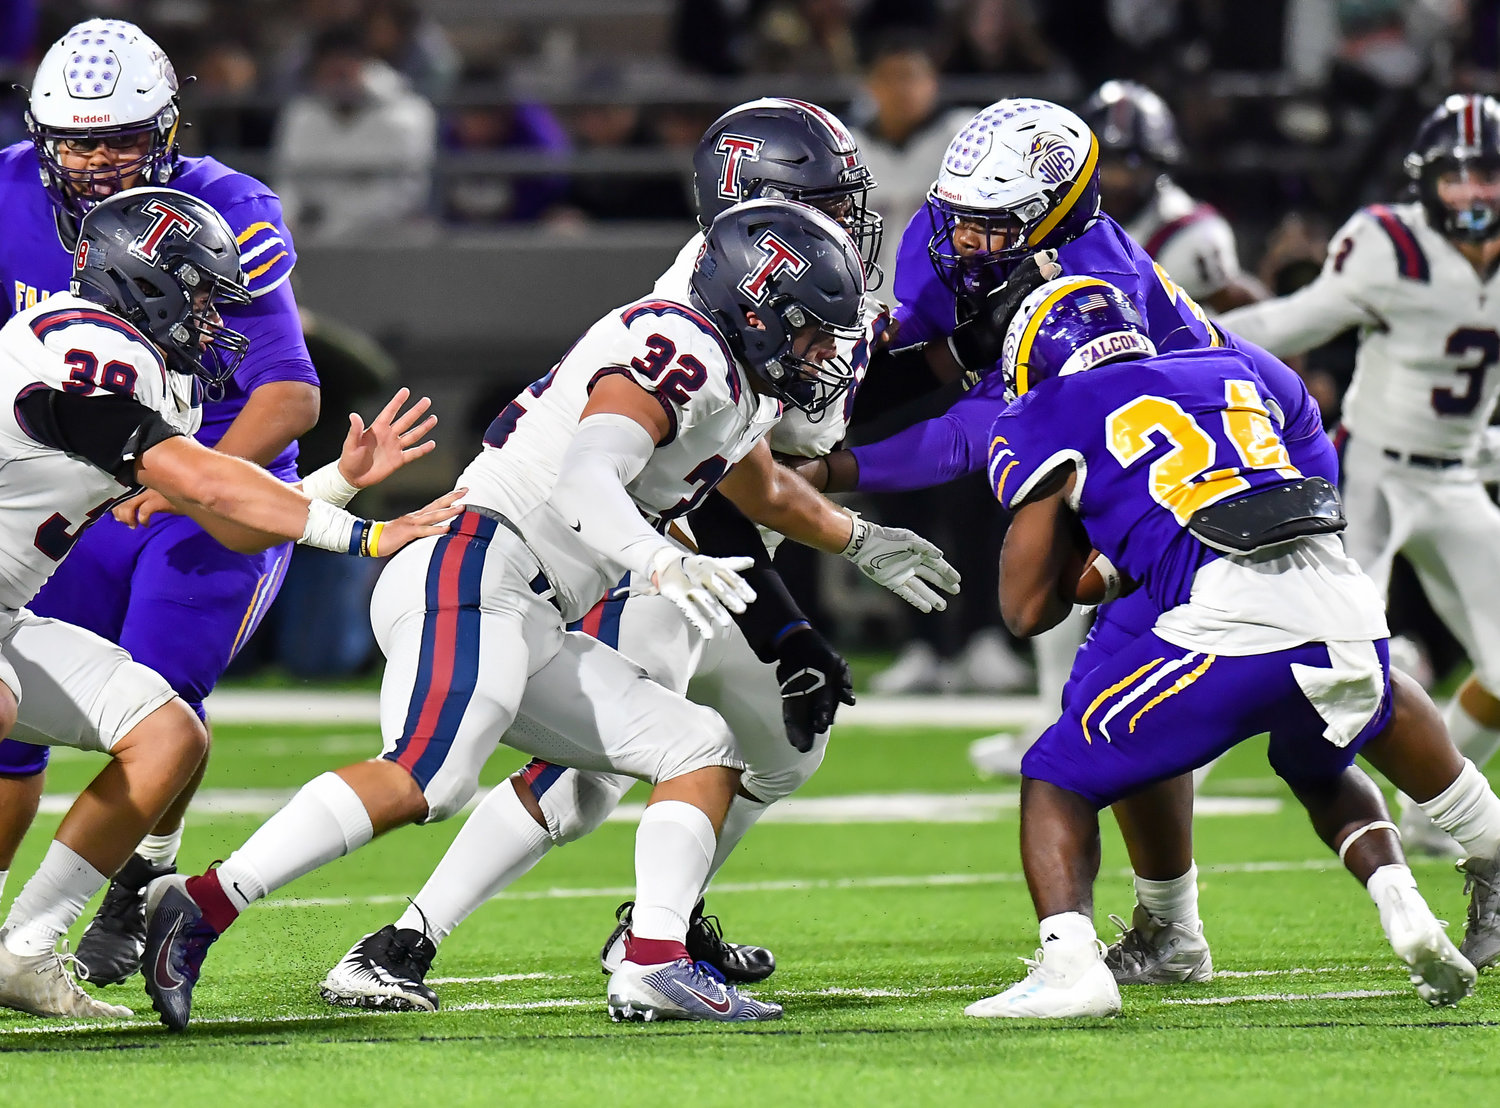 Houston Tx. Nov 19, 2021: Tompkins #32 Bryce Shaink makes the stop on Jersey Village, Rashon Estes #24 during the UIL area playoff game between Tompkins and Jersey Village at Pridgeon Stadium in Houston. (Photo by Mark Goodman / Katy Times)